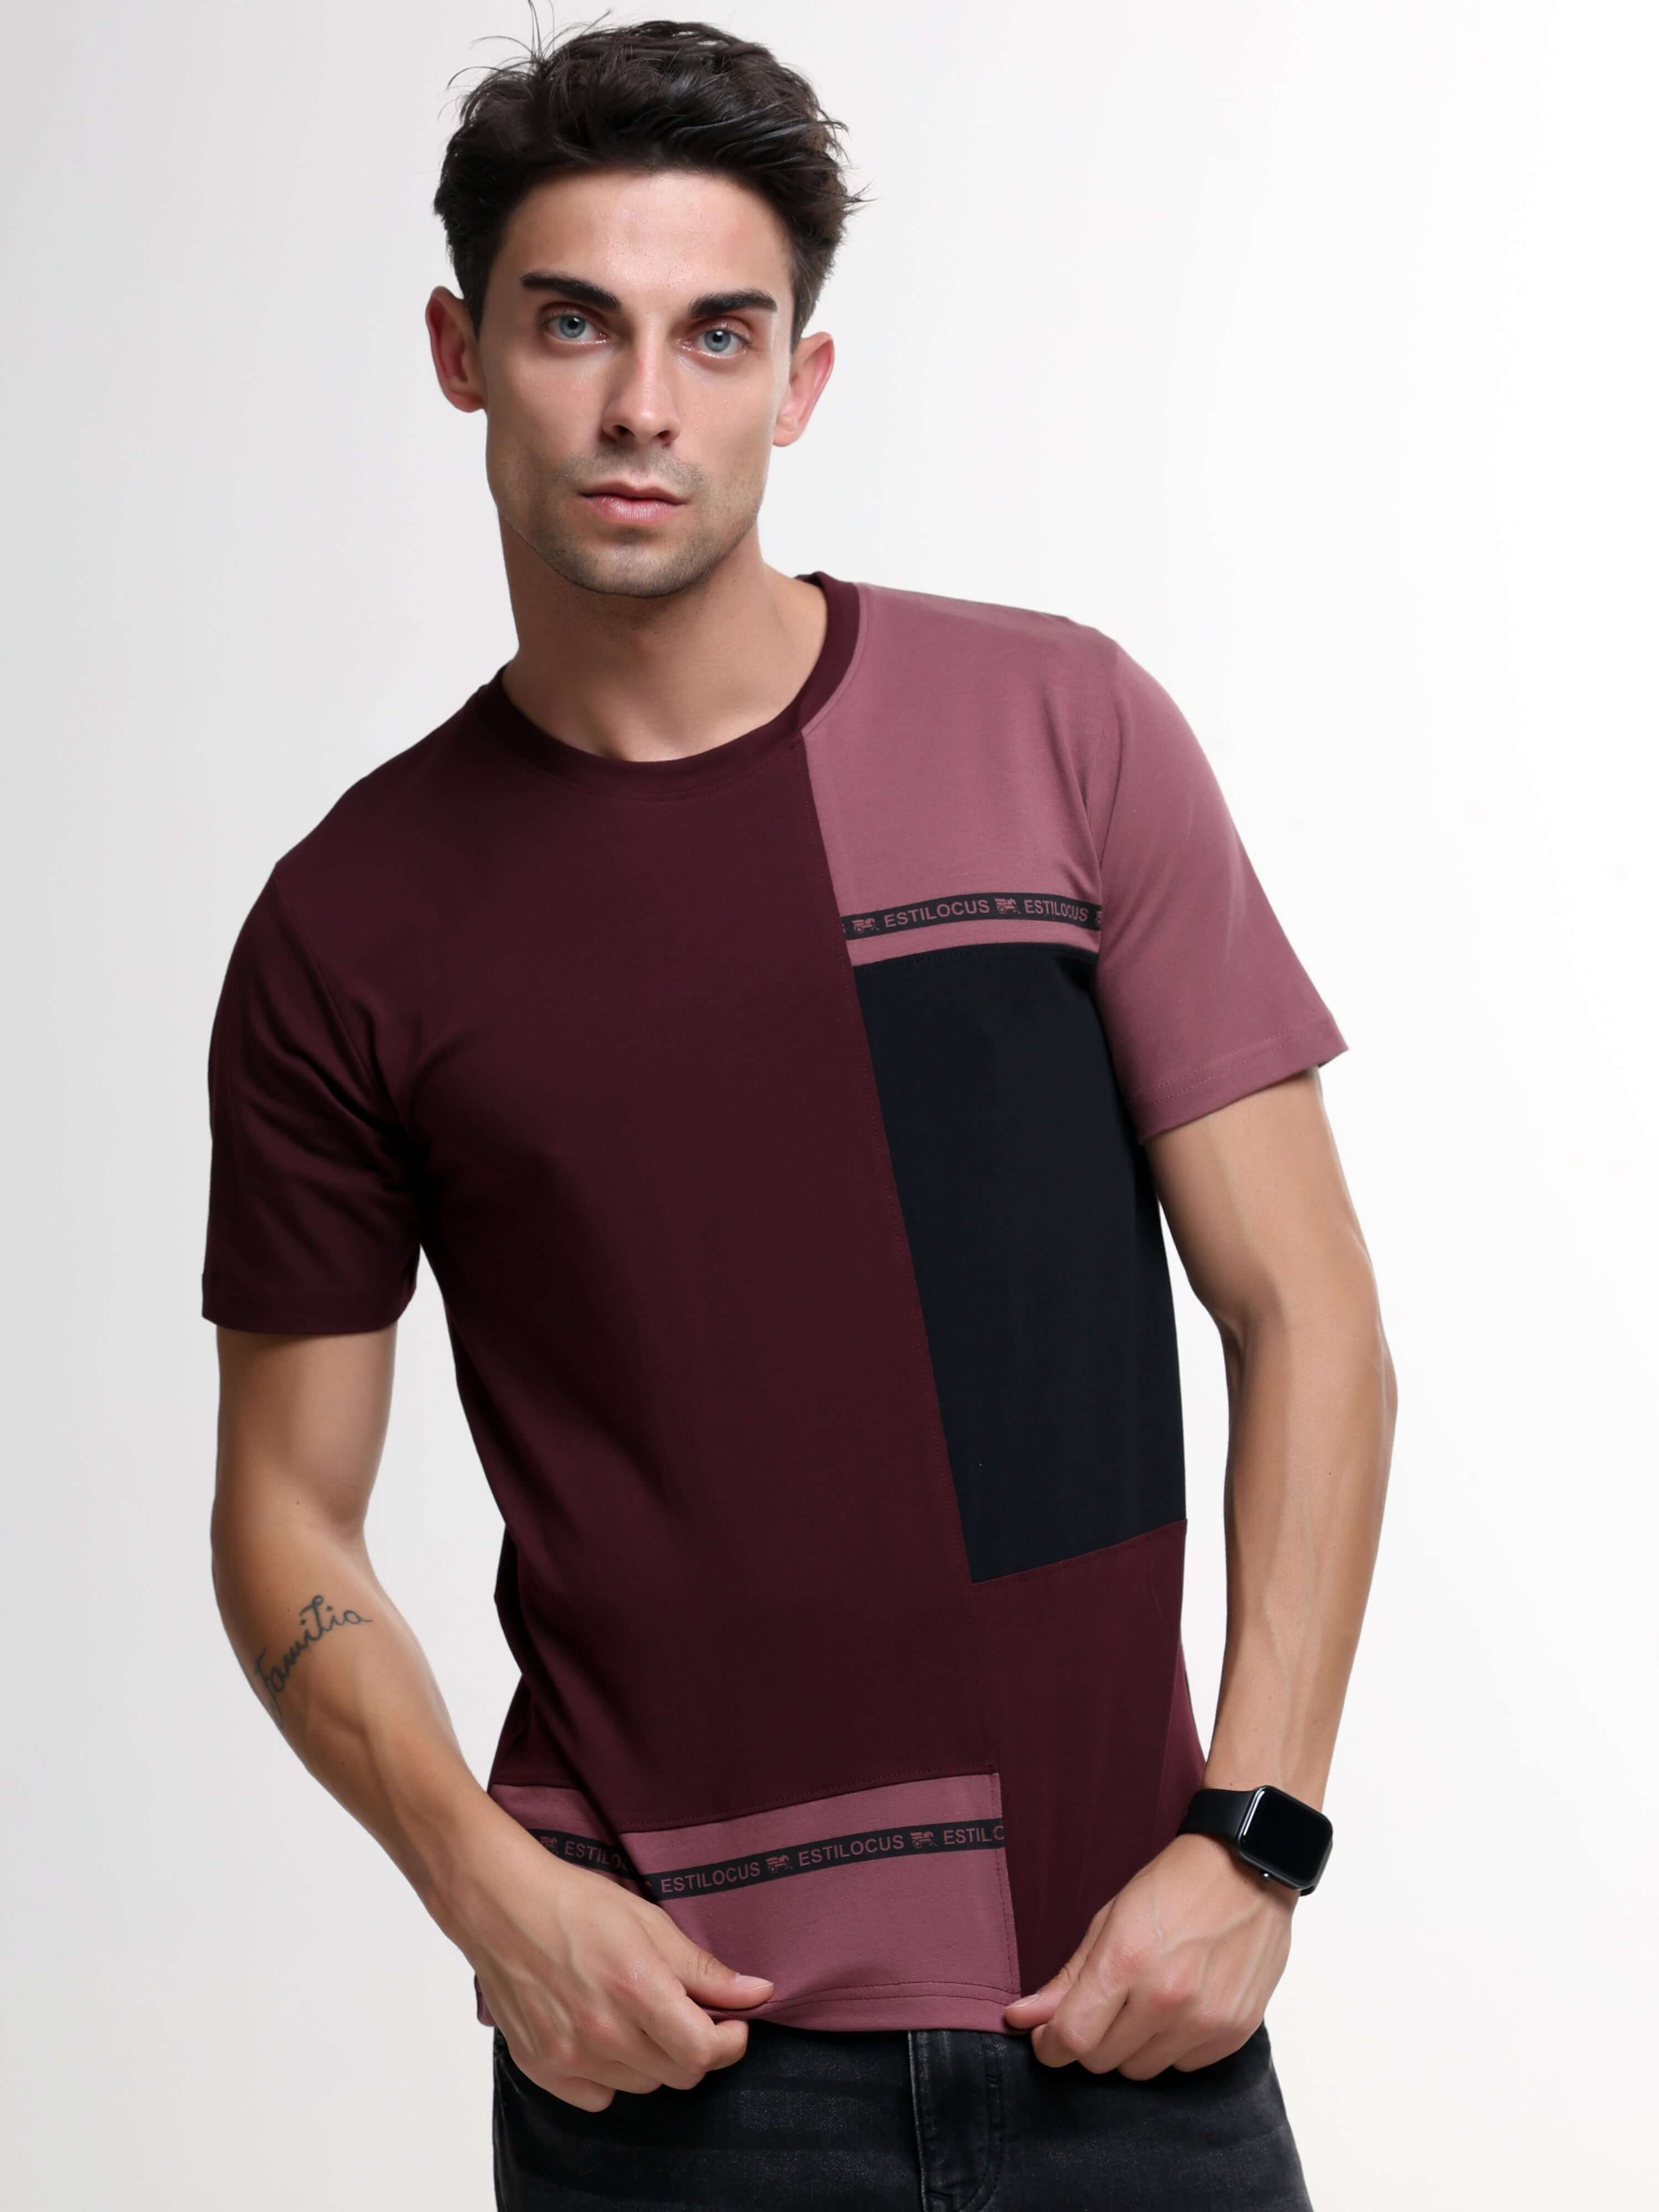 Thrive burnt prune light weight tshirt shop online at Estilocus. This relax-fit Cut and Sew T-shirt is comfortable and the perfect essential all year round. Pair it with white jeans and sneakers and layer it up with a denim jacket for a casual and put-tog